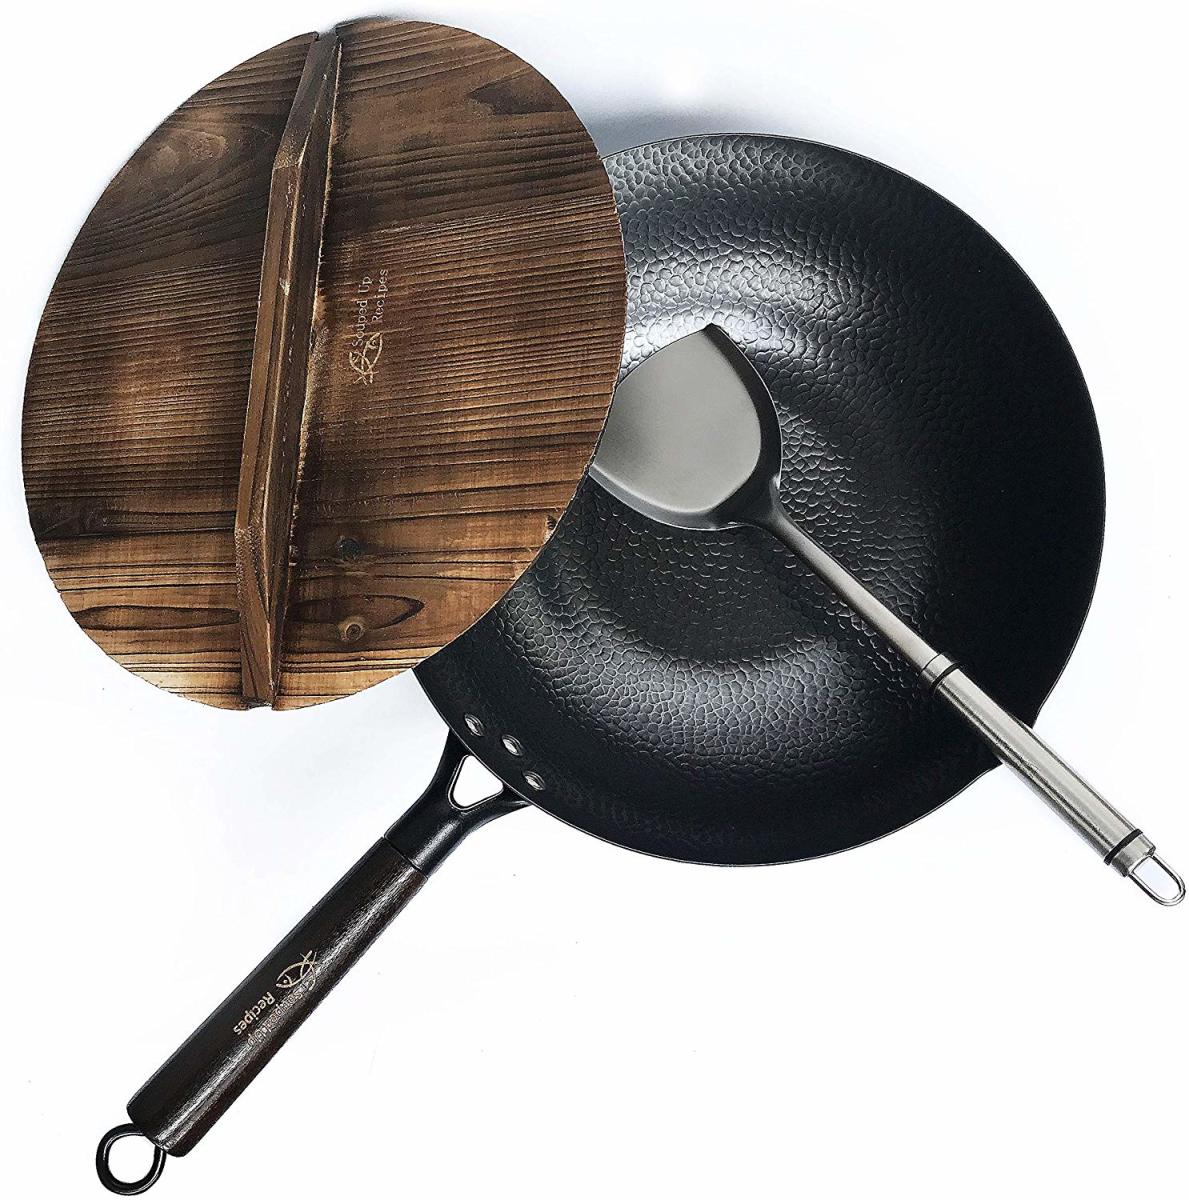 The Souped Up Recipes flat bottom carbon steel wok.